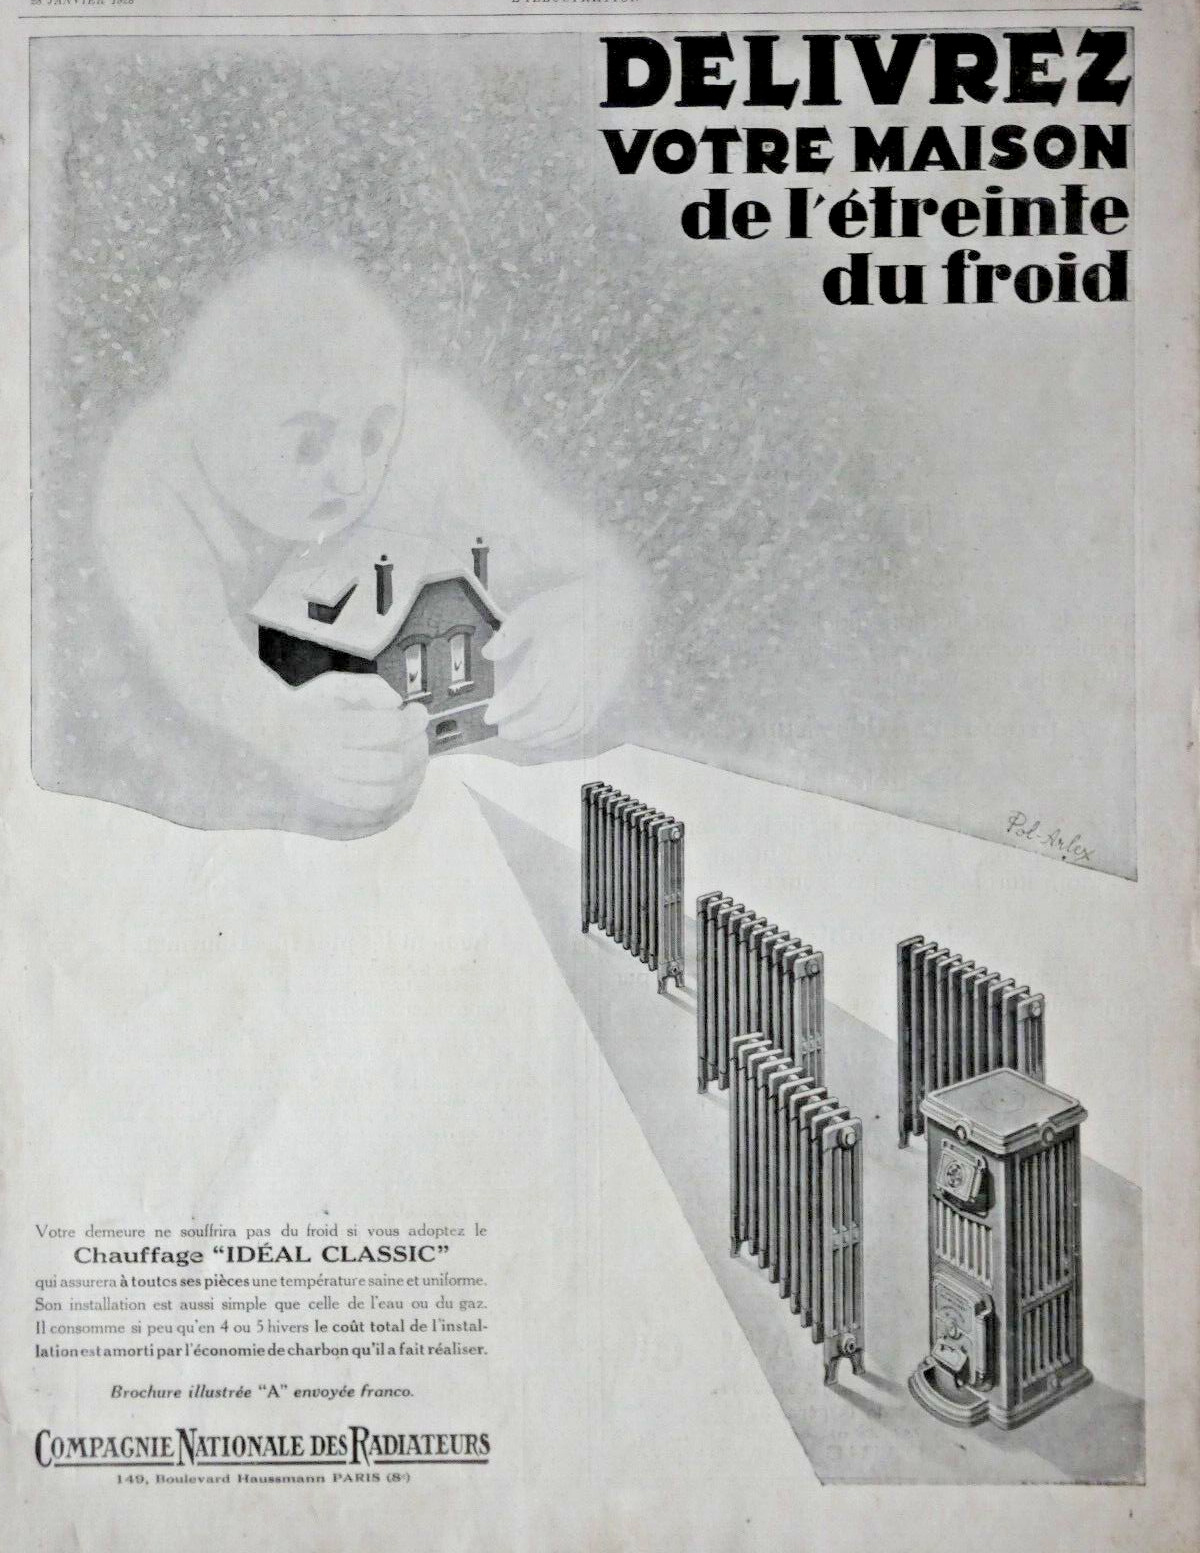 1928 NATIONAL RADIATOR COMPANY ADVERTISEMENT DELIVER YOUR HOME FROM THE COLD